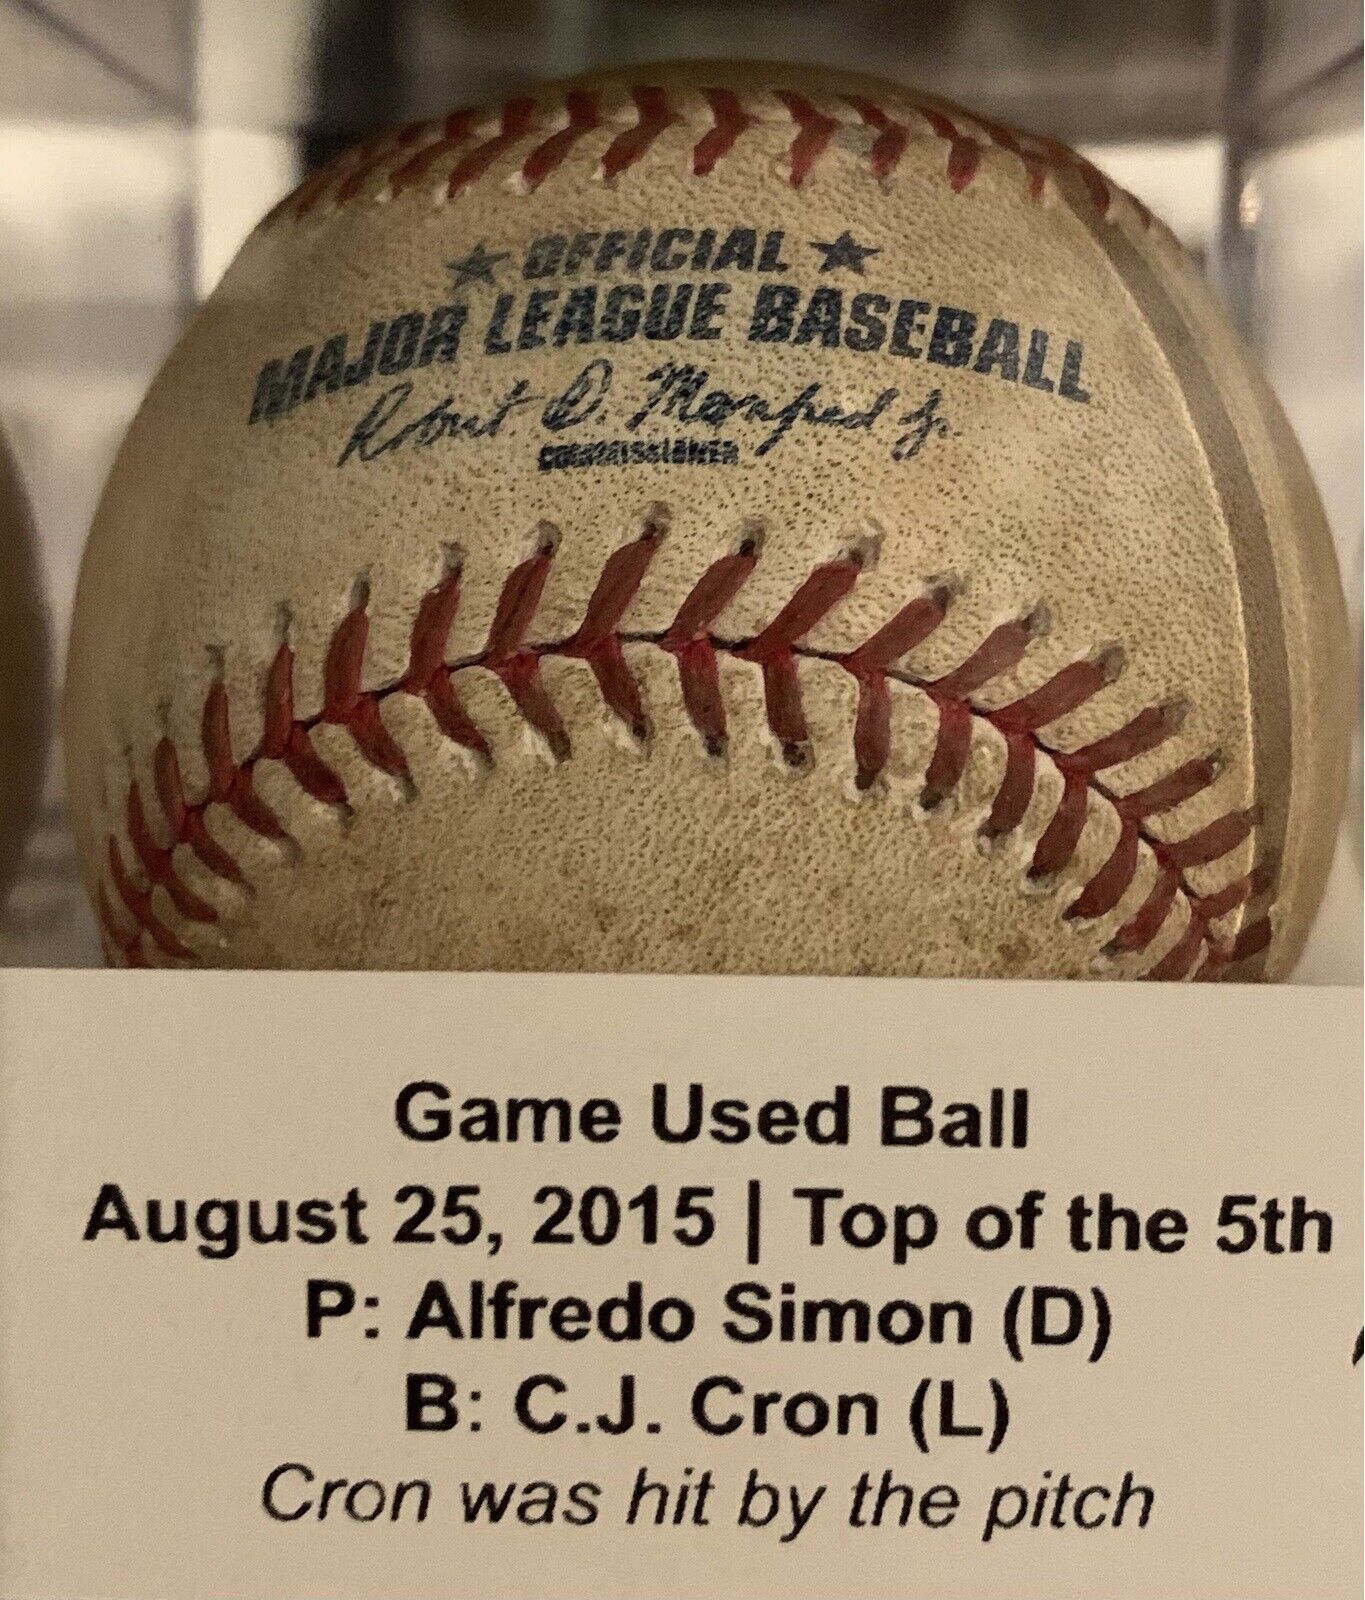 2015 Game Used Baseball Angels vs. Tigers C.J. Cron Hit by Pitch